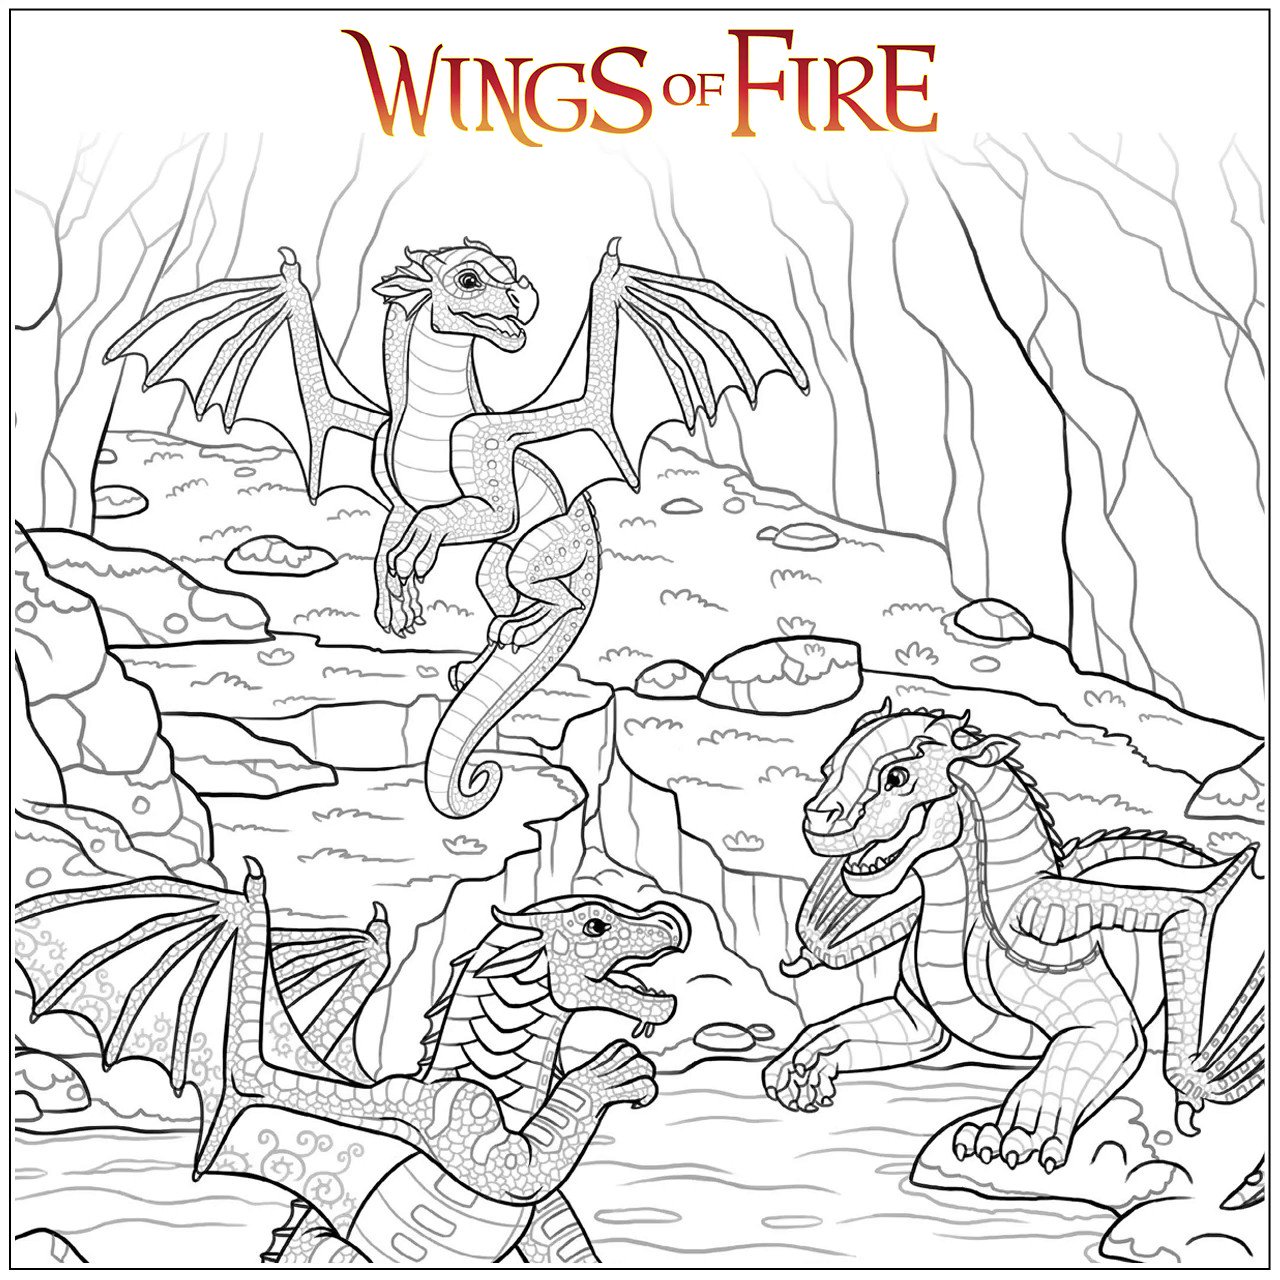 Scholastic on x ð hey fanwings have you bought the official wings of fire coloring book ð spread your creative wings and color all your favorite wings of fire dragons in this